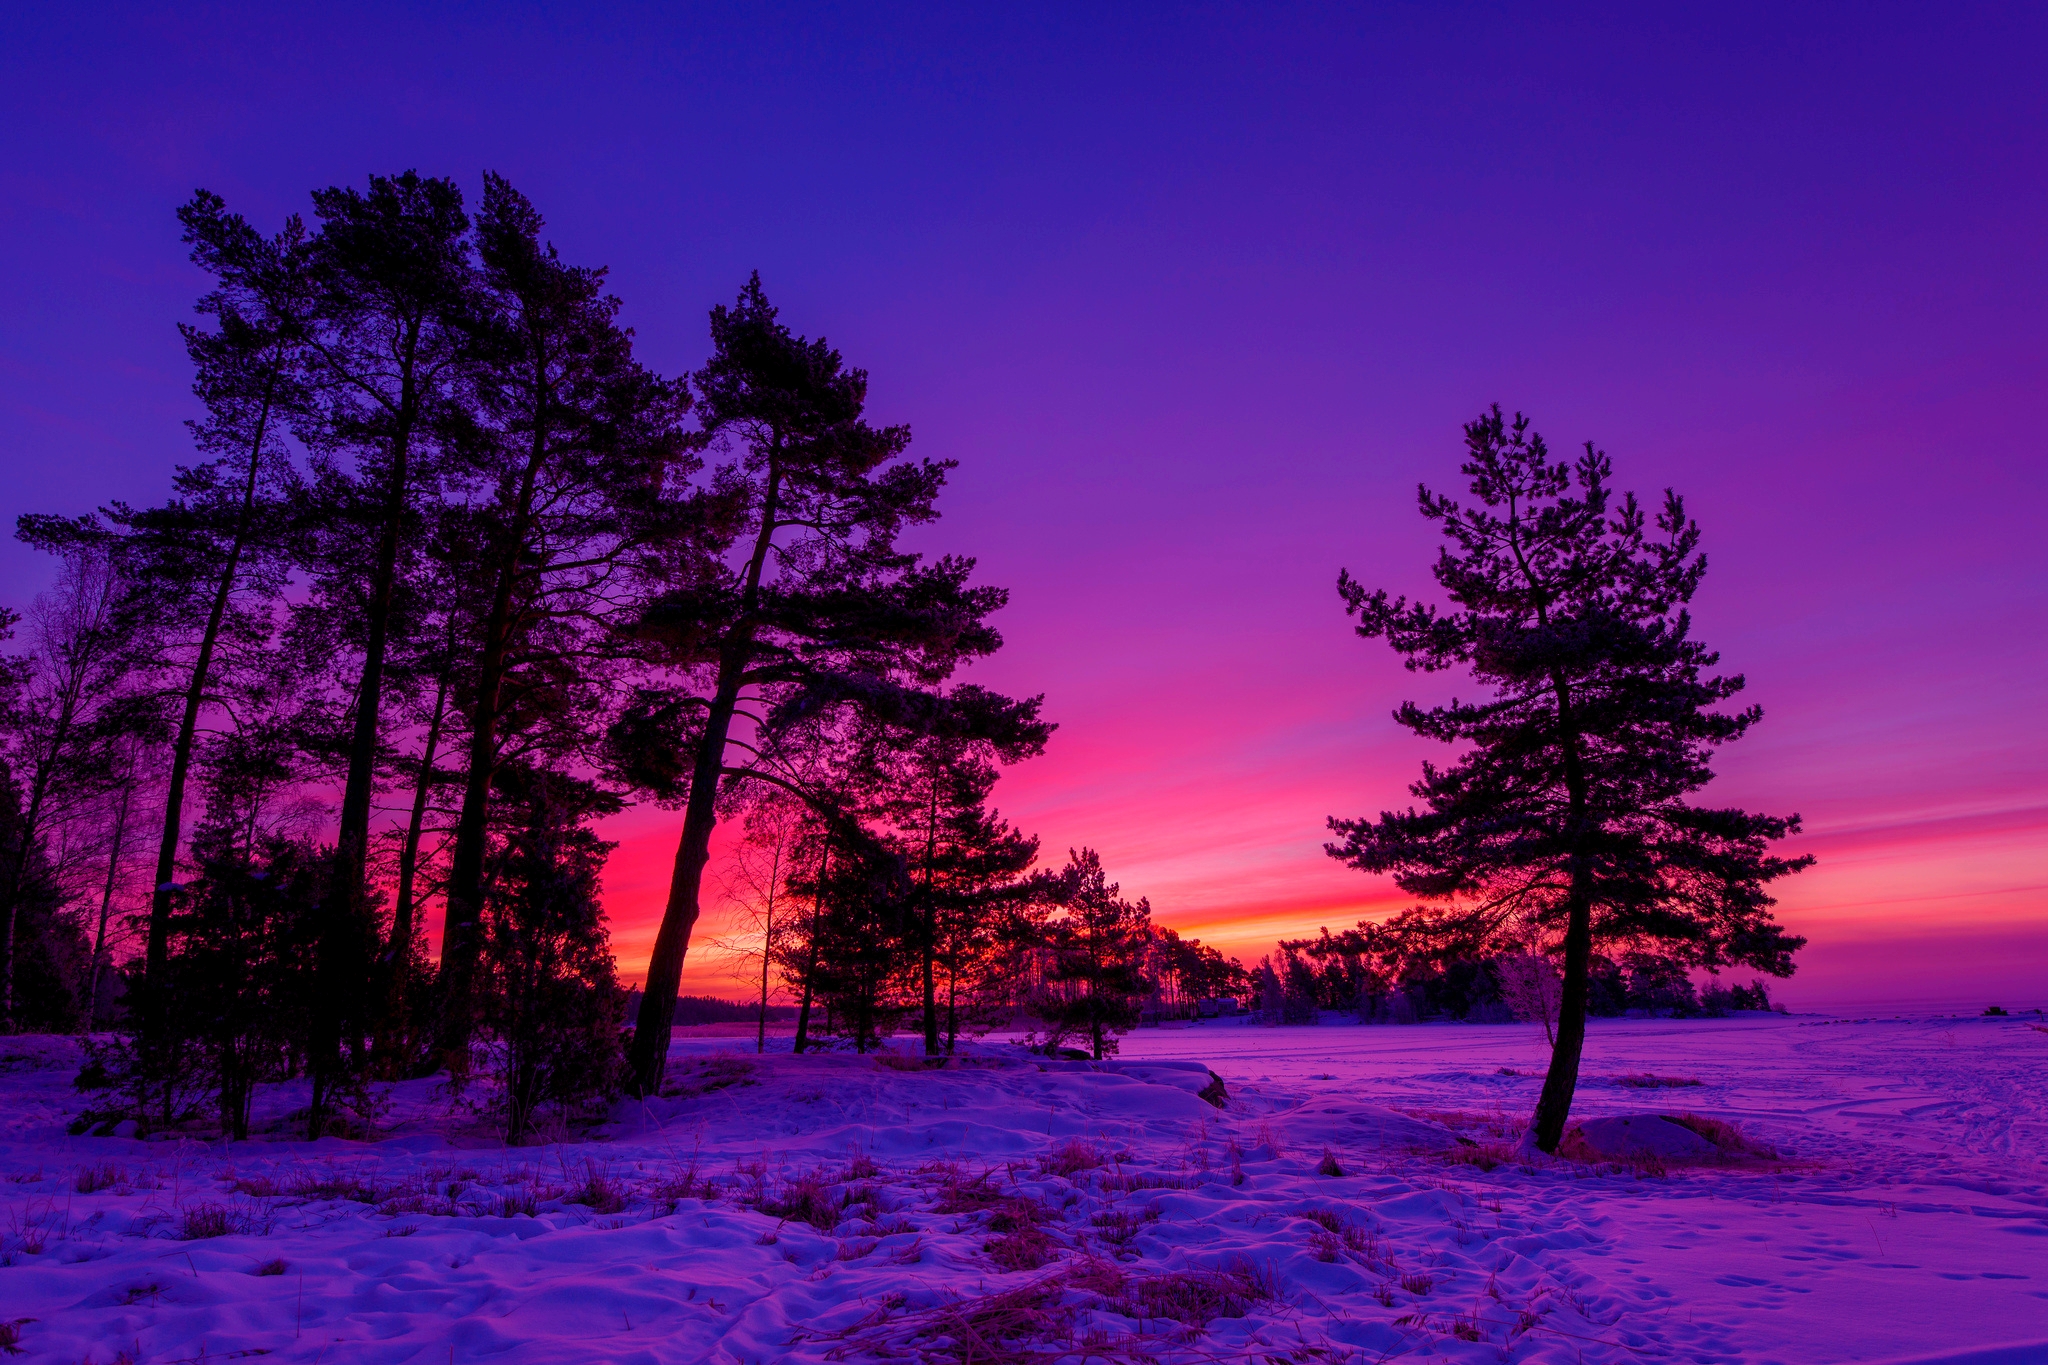 HD Awesome Winter Sunset Desktop Wallpapers - HD Wallpapers ...